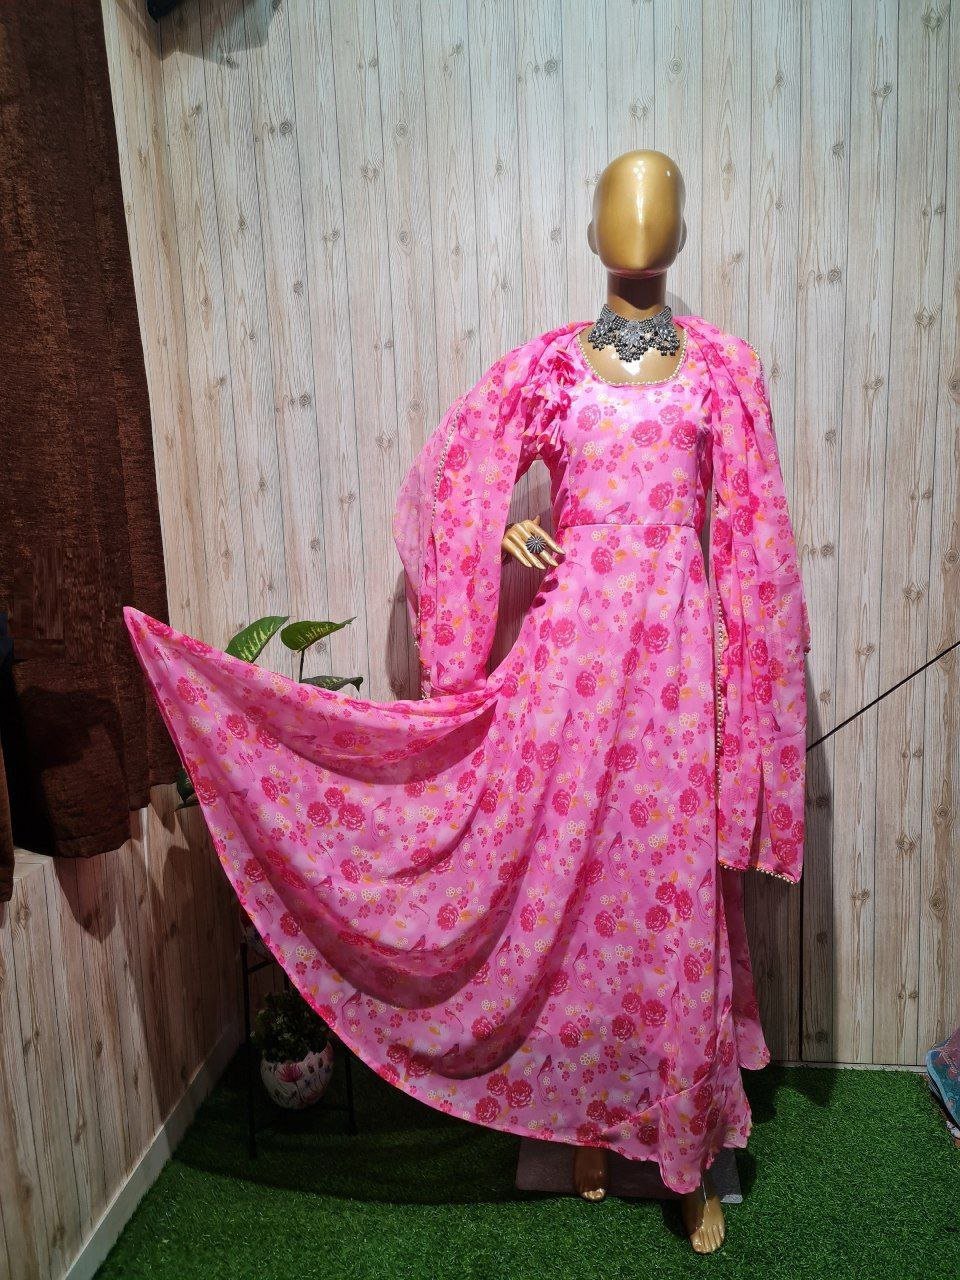 Hot Pink Georgette Gown with Floral Digital Printed Dupatta in all sizes up to 7XL Gown with Dupatta Shopindiapparels.com 